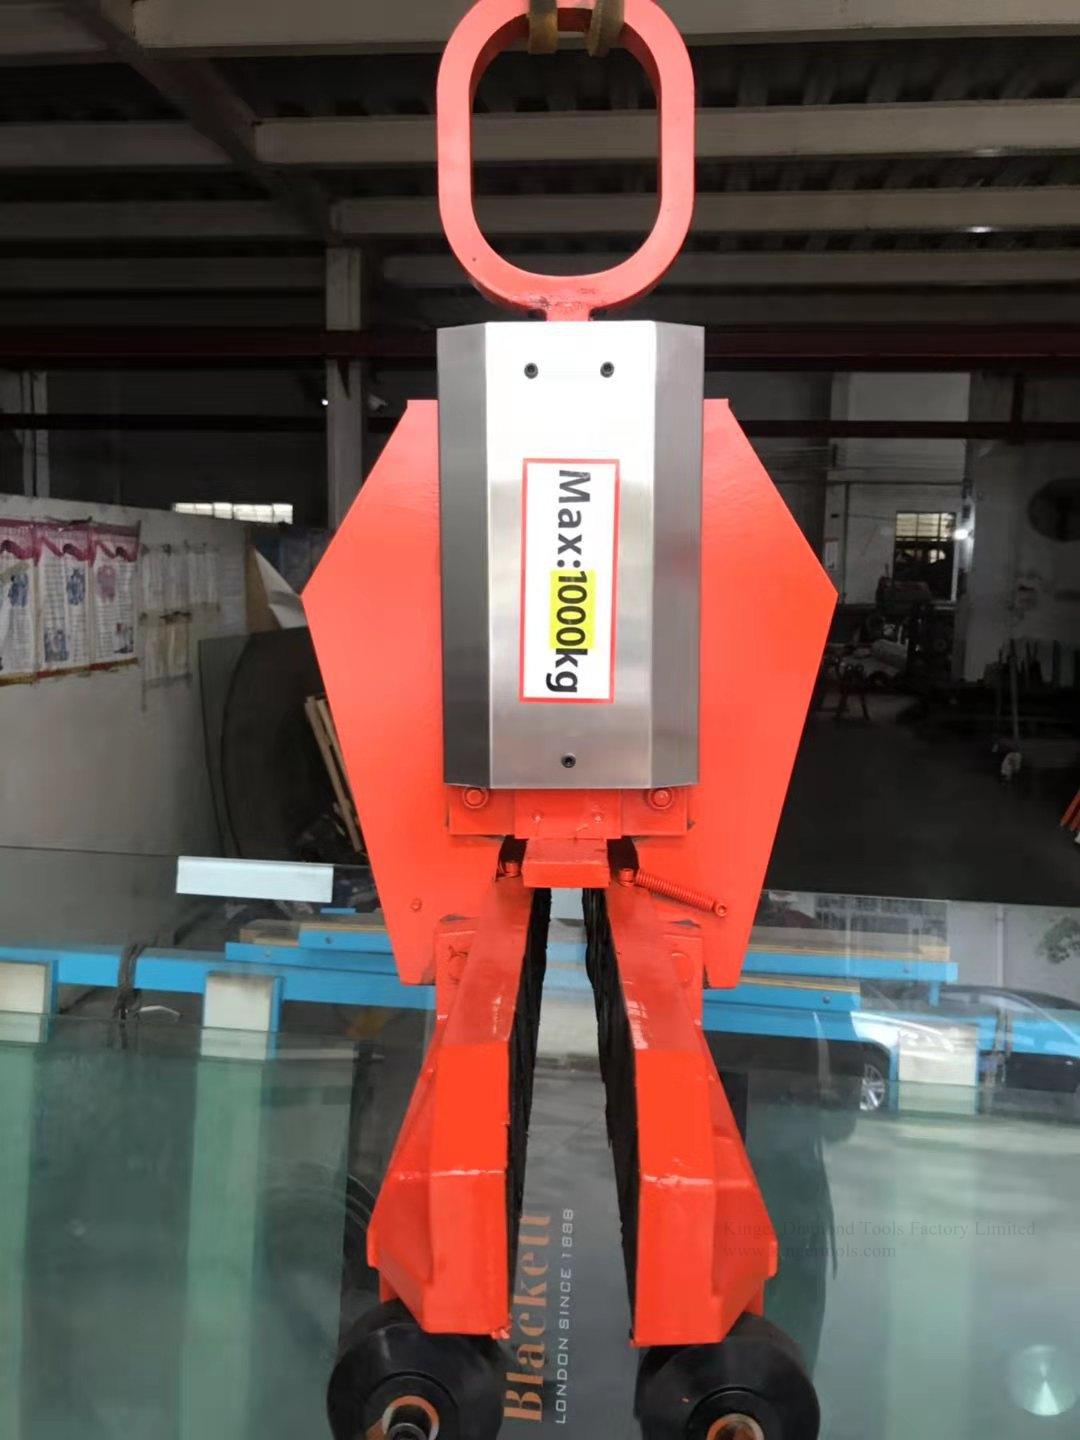 KT-15 Pinch Grab (Sheep Lifting Clamp) for Glass Lifting and Moving